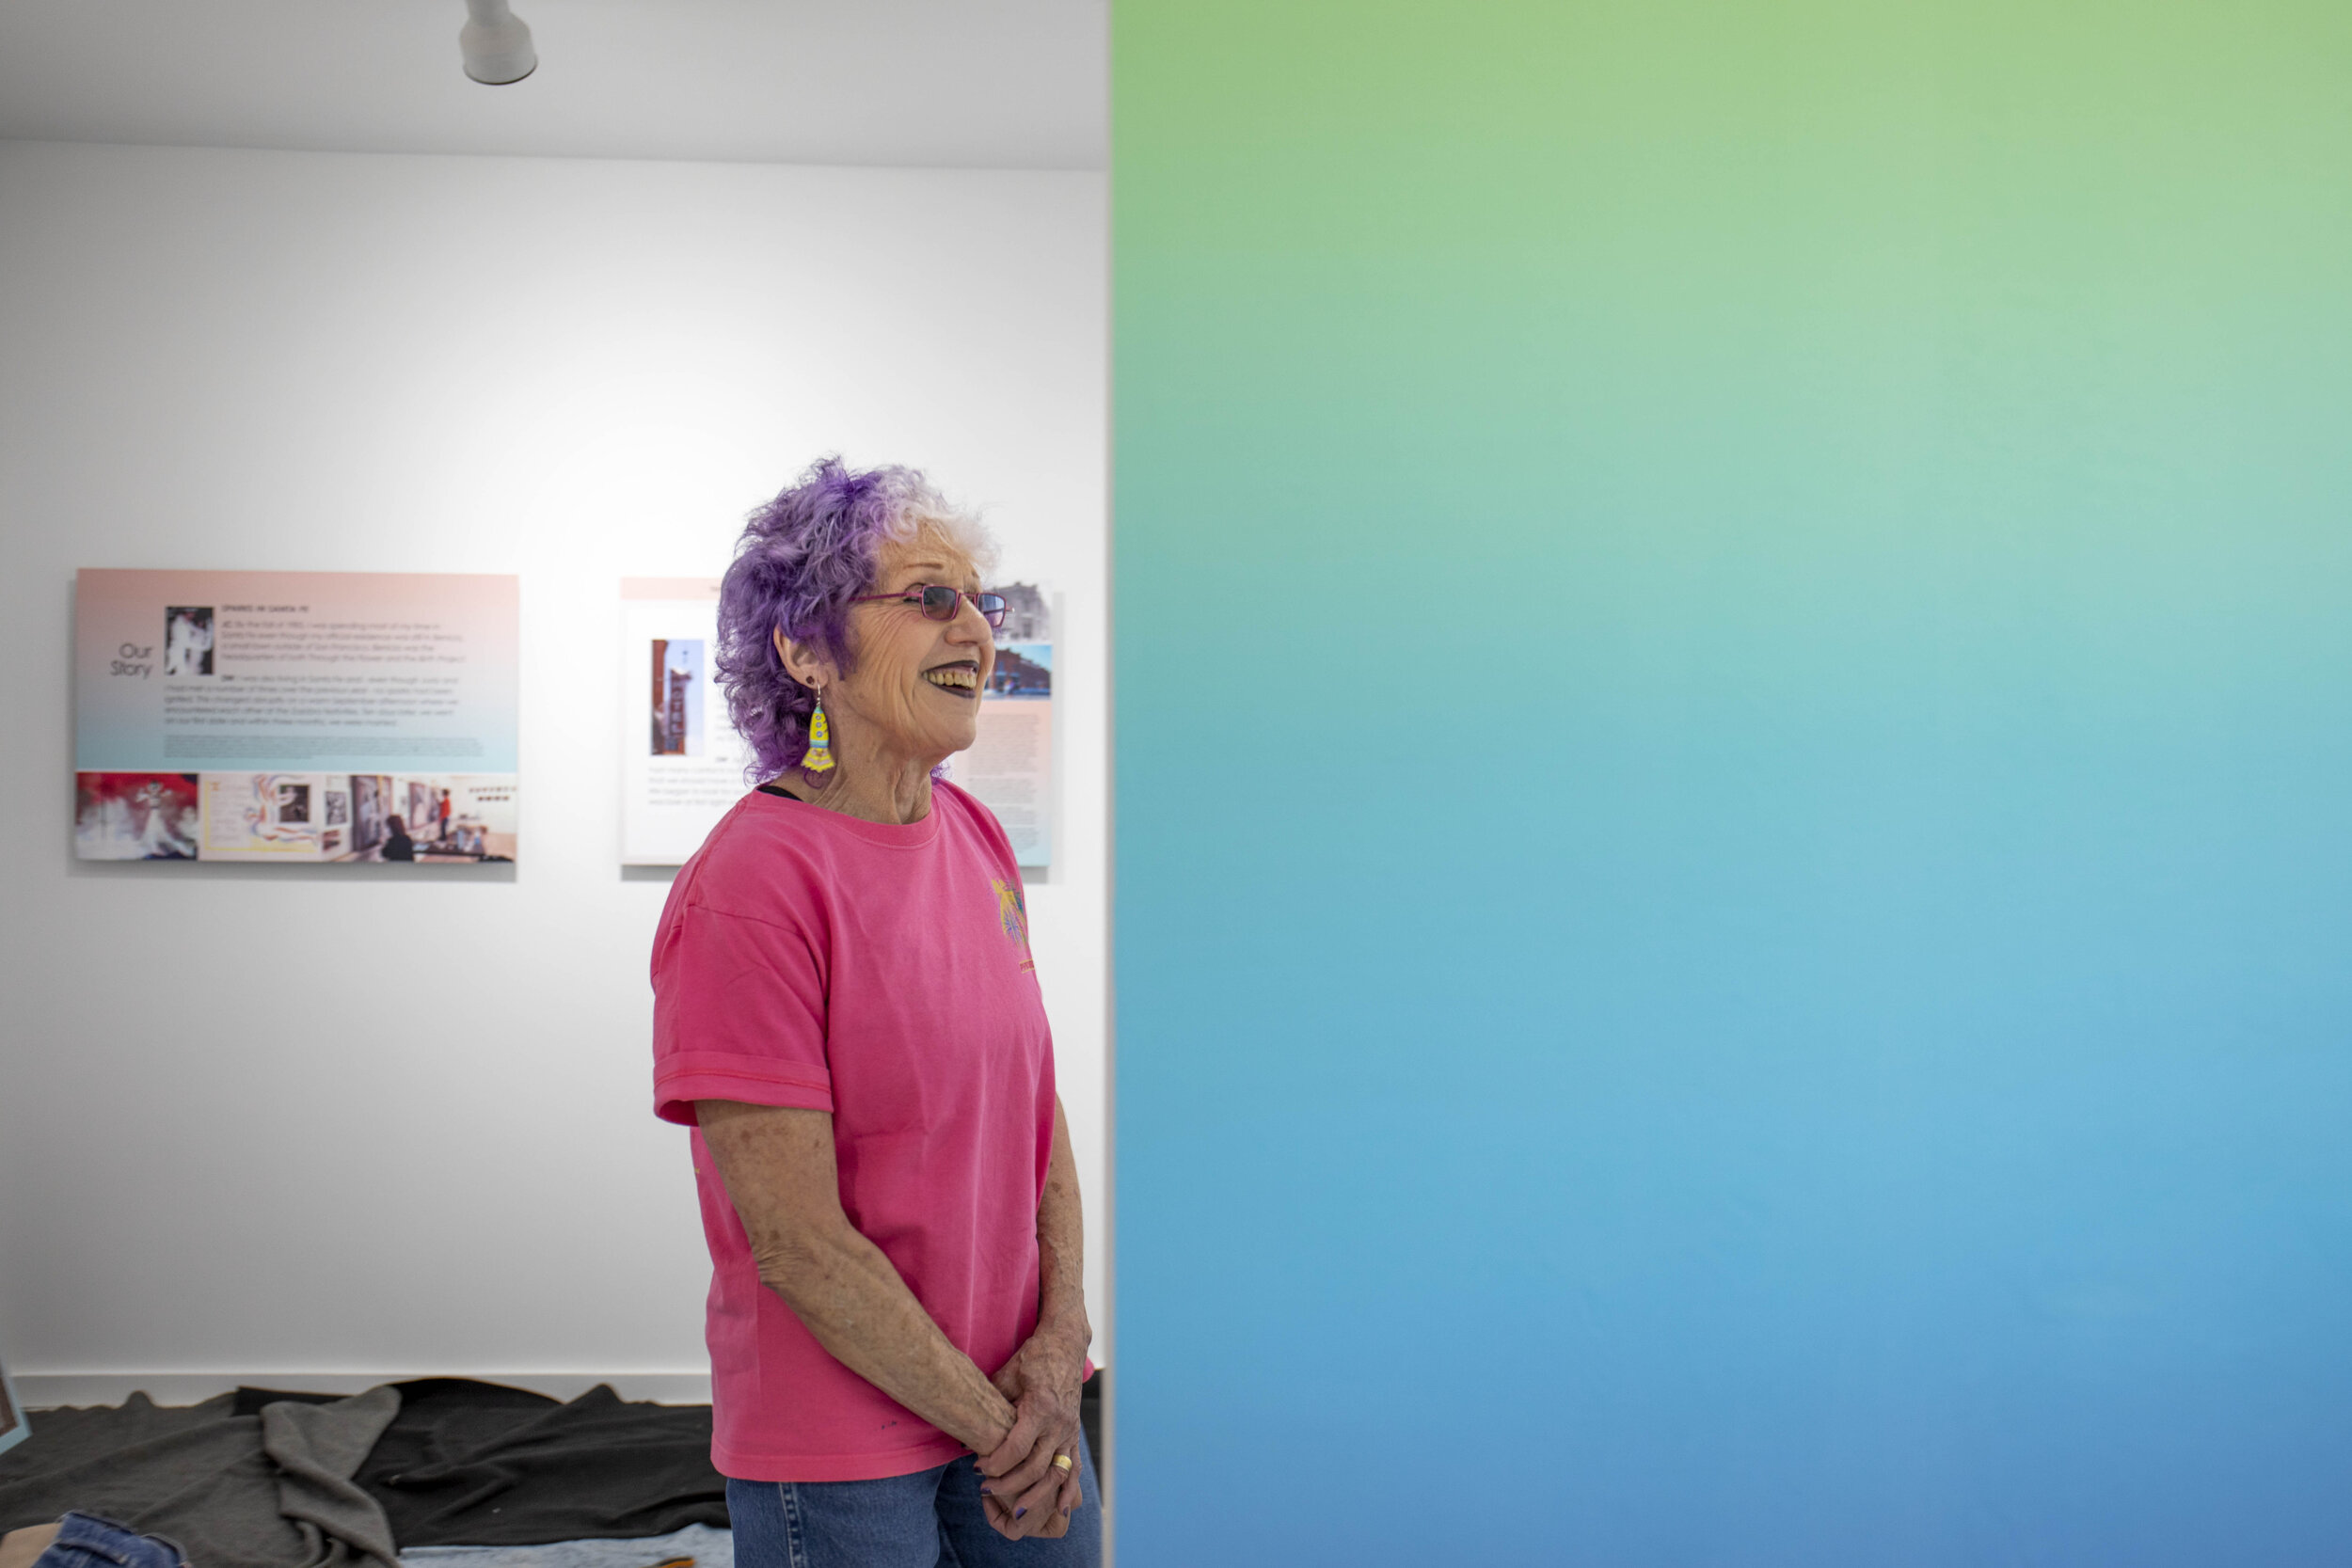  Judy Chicago at Through the Flower Art Space behind wallpaper she designed. The grand opening is set for July 20th through the 21st. The gallery of Chicago’s work has been at the center of controversy in the small town of Belen, N.M. due to differin